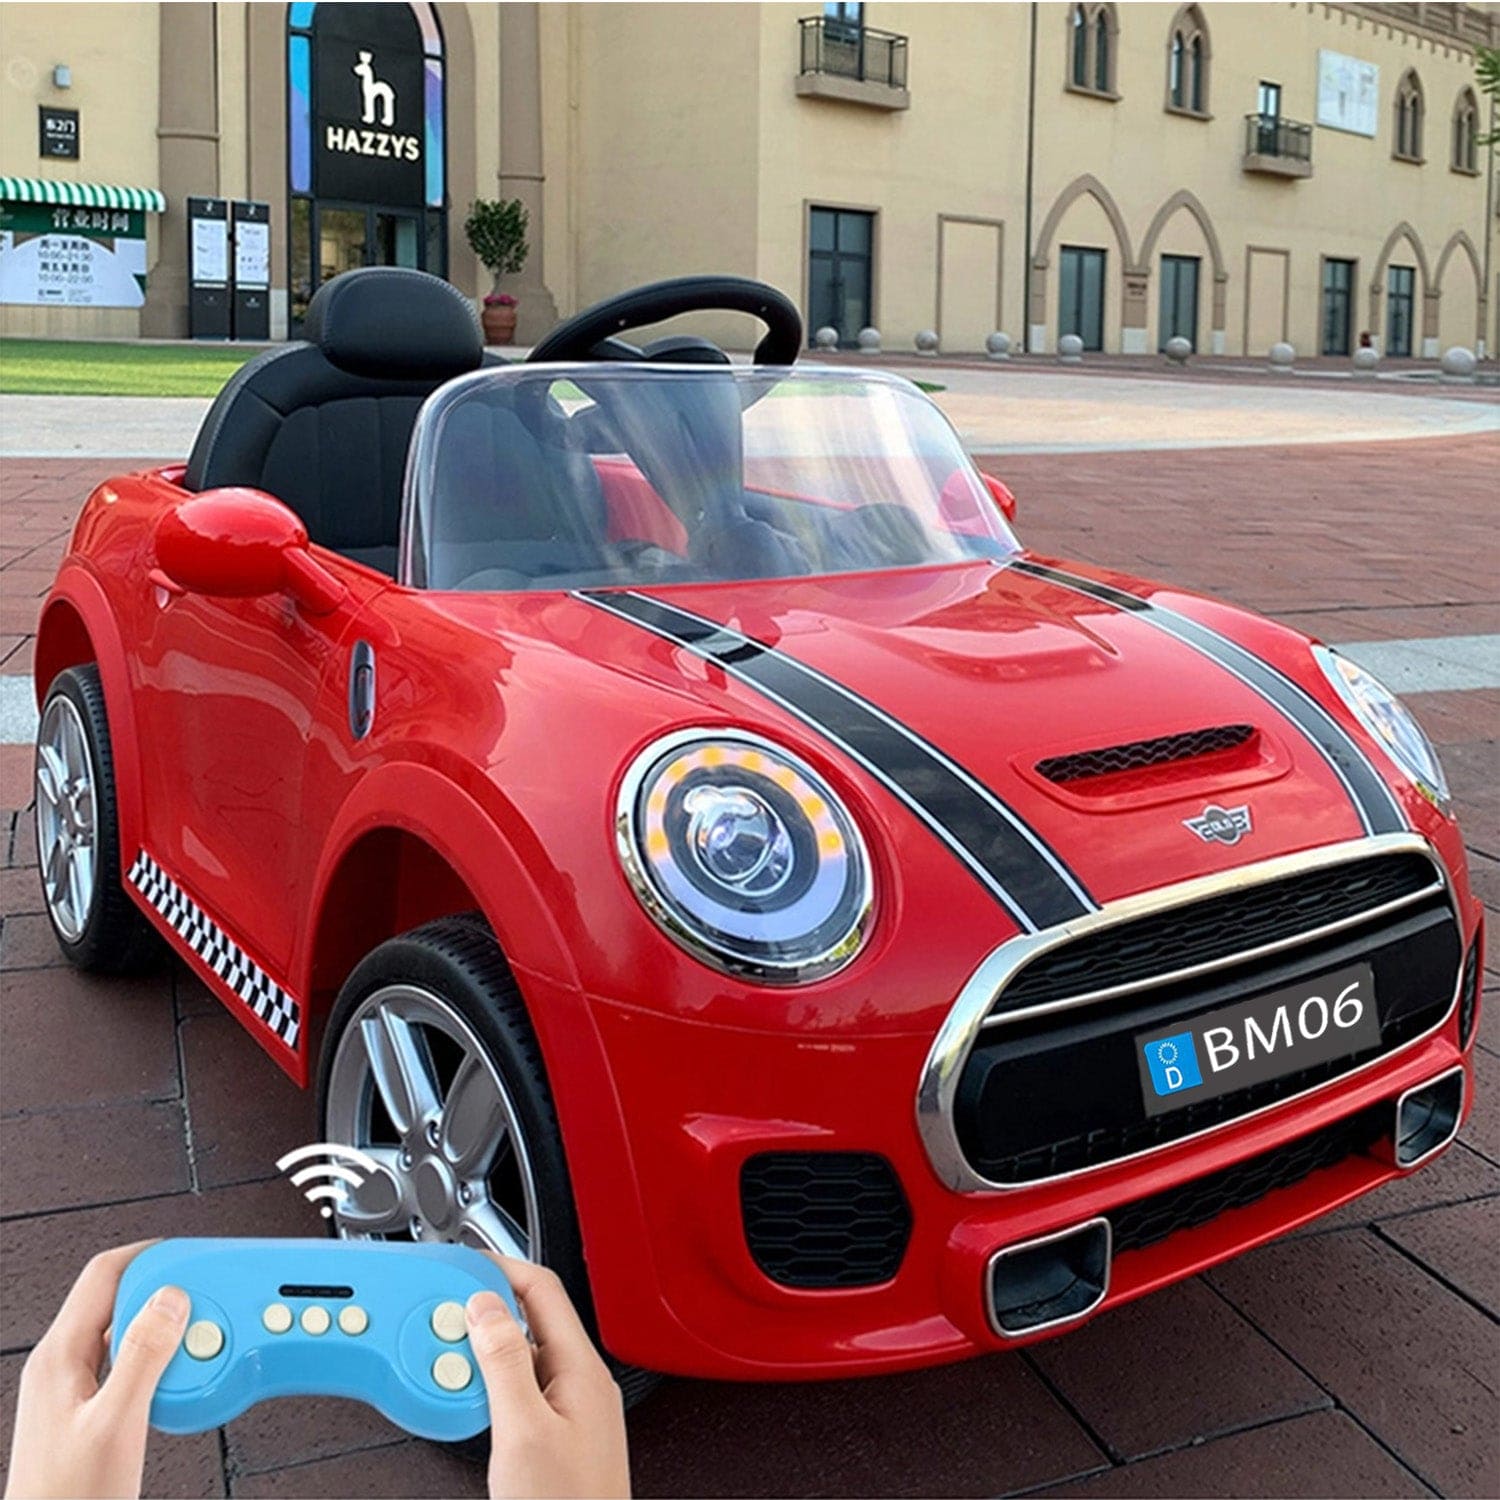 Baby Moo Mini Cooper Electric Ride-On Car for Kids | Rechargeable 12V Battery | Remote Control | USB MP3 Player | Ages 1-5 - Red